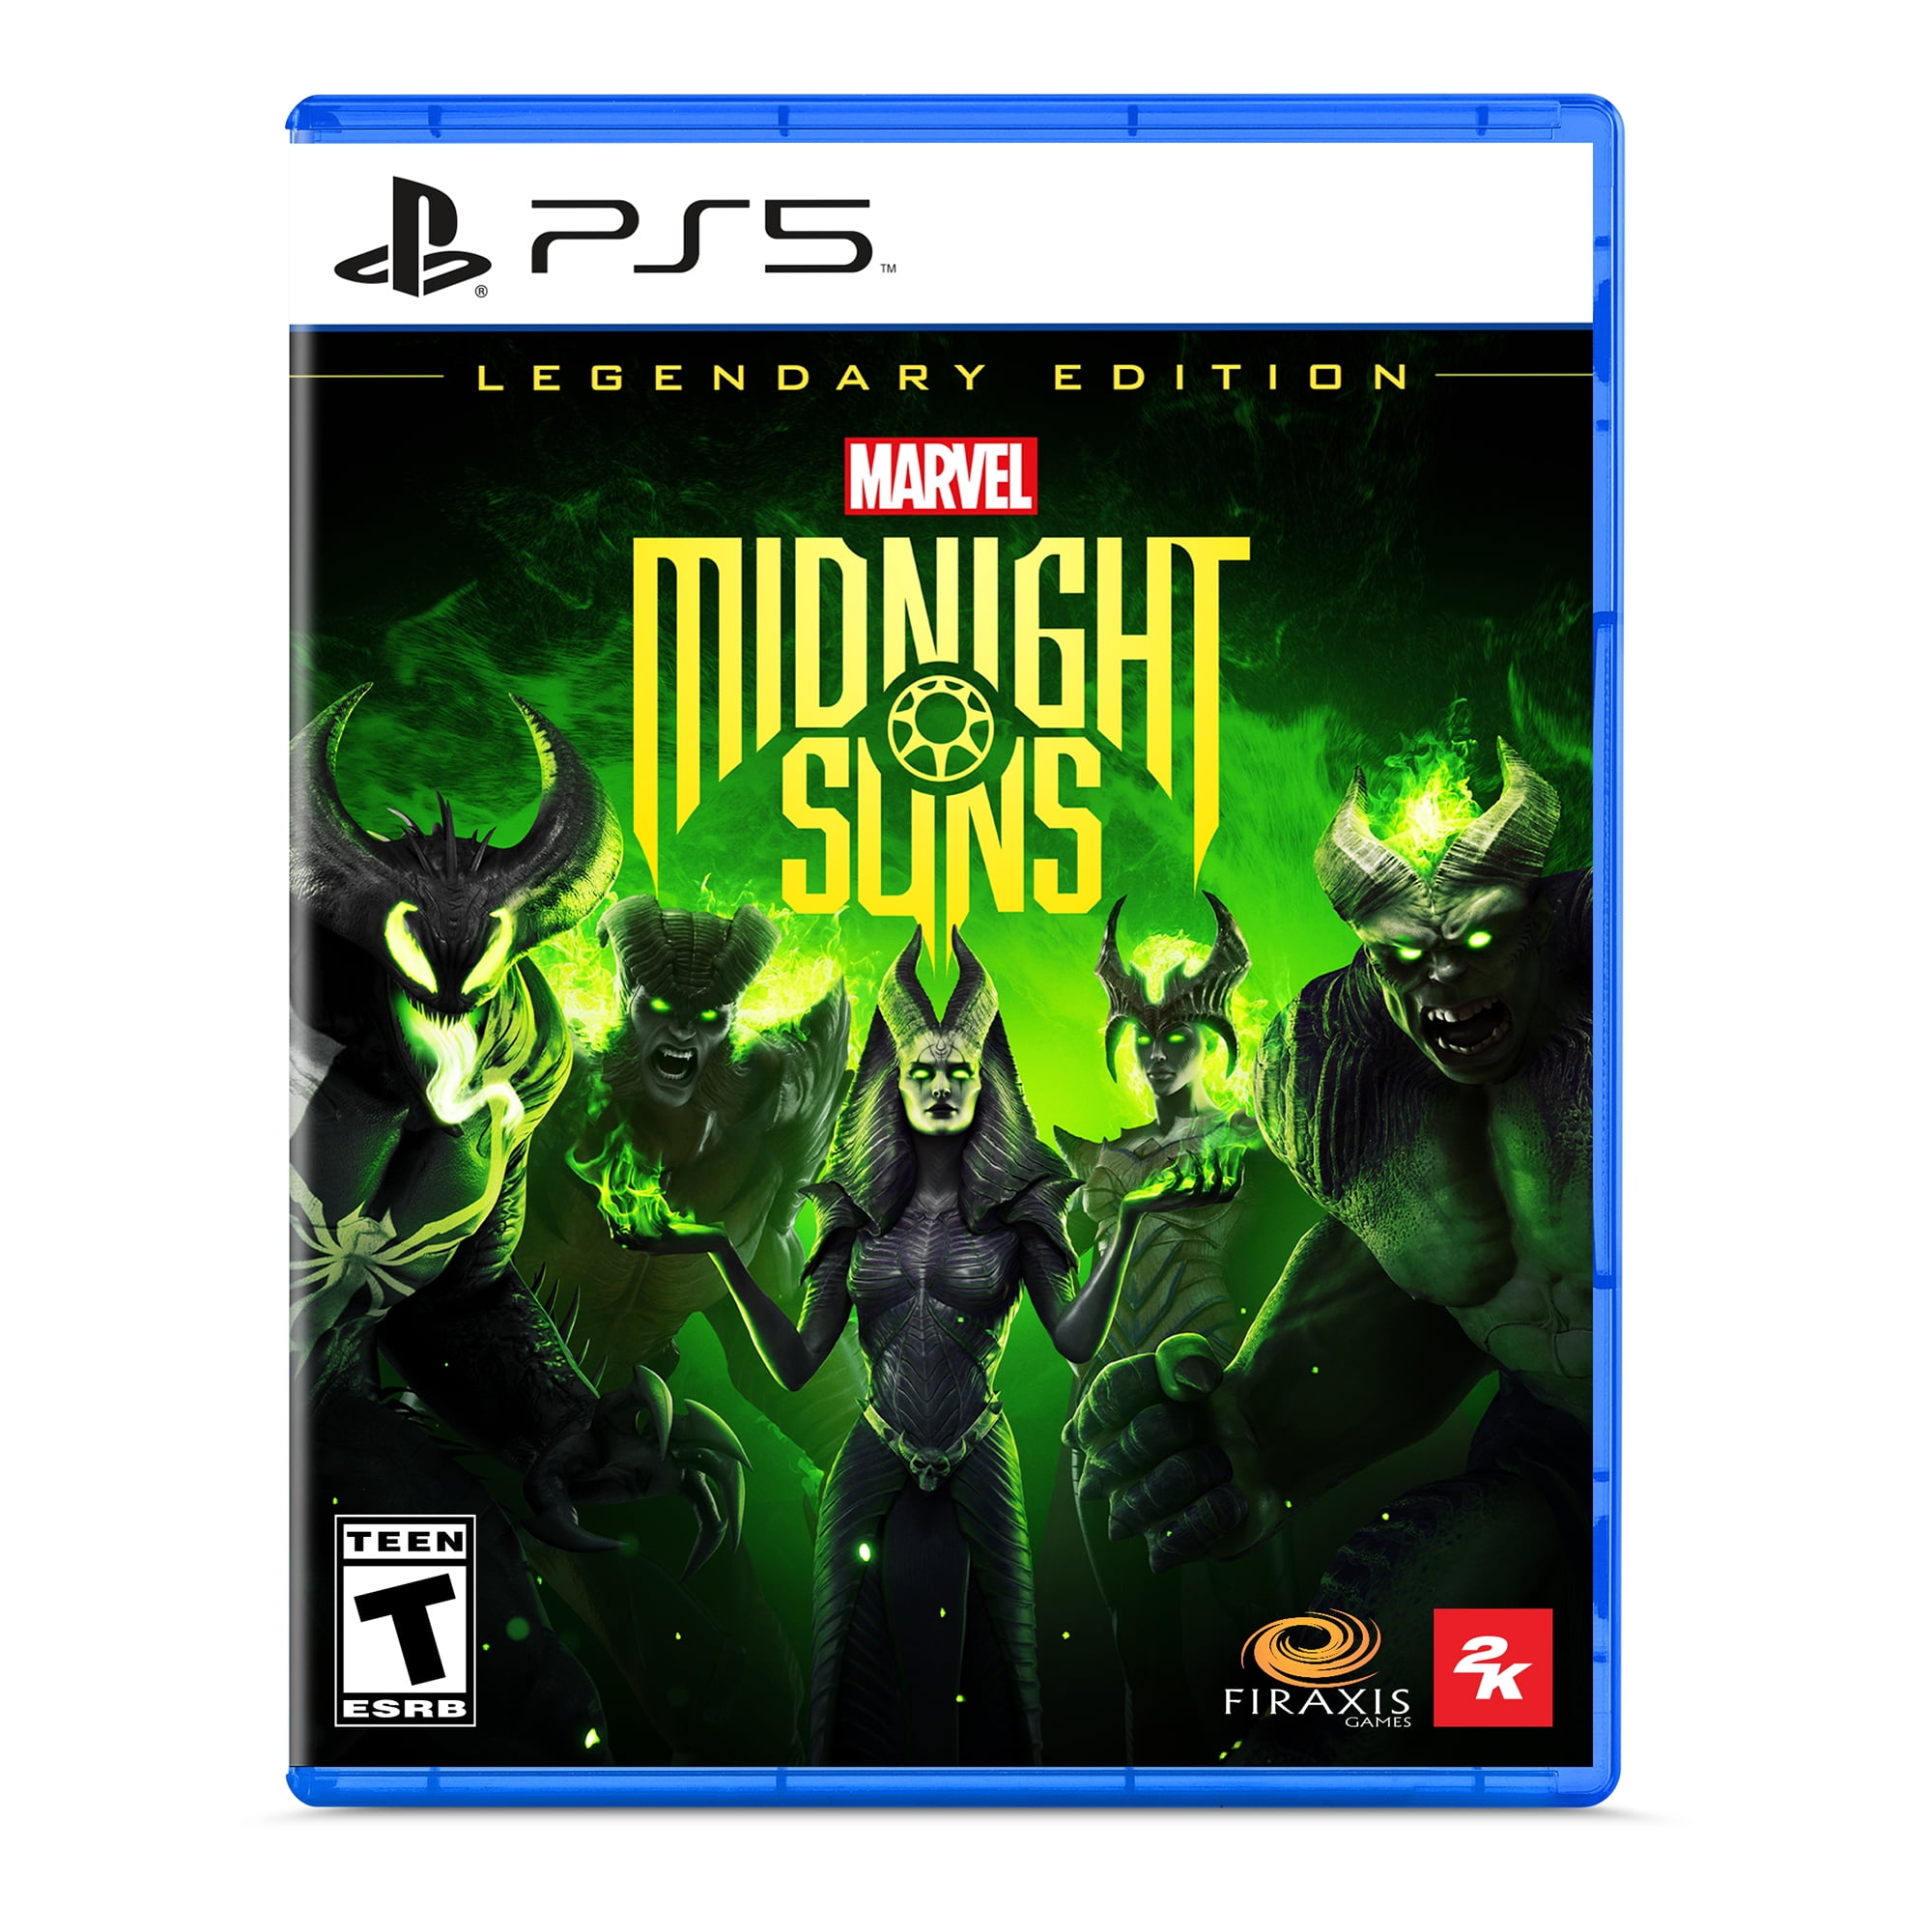 Marvel Midnight Suns: Release Date, Gameplay, Pre-Order Bonuses and More